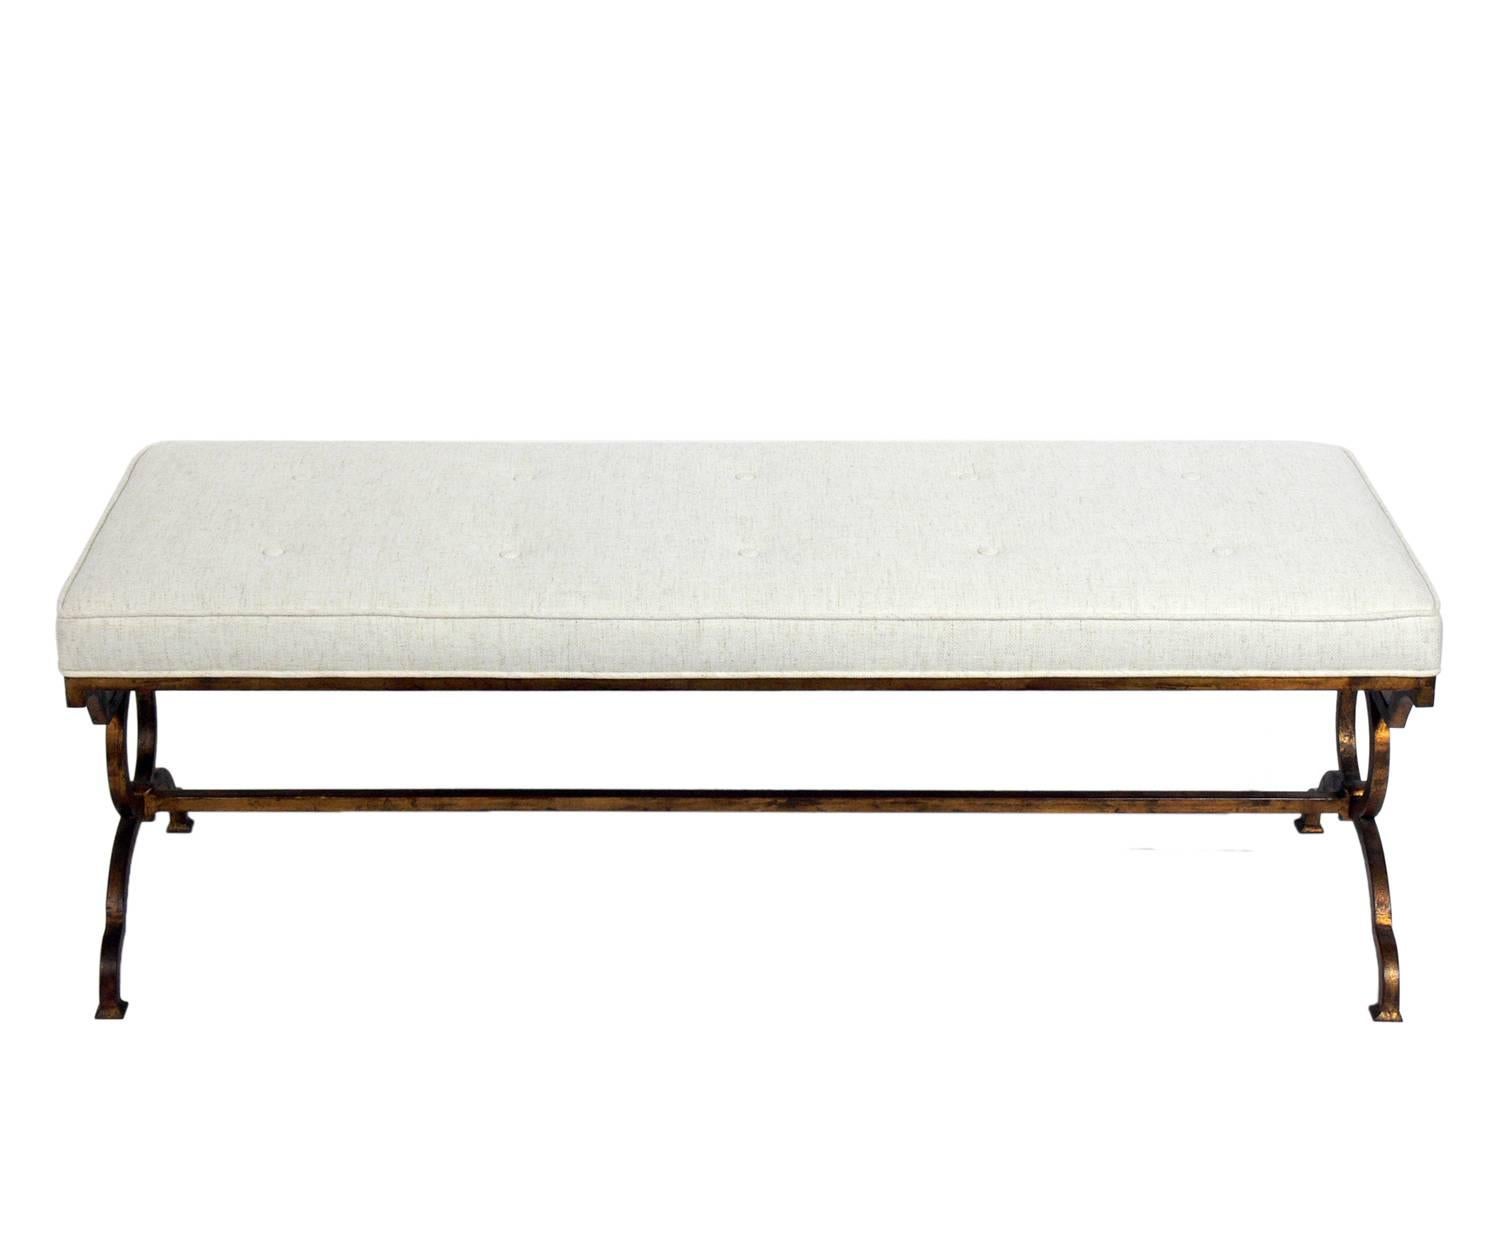 Elegant French gilt metal Bench, France, circa 1950s. It has been reupholstered in an ivory color herringbone fabric. The gilt metal frame retains it's warm original patina.